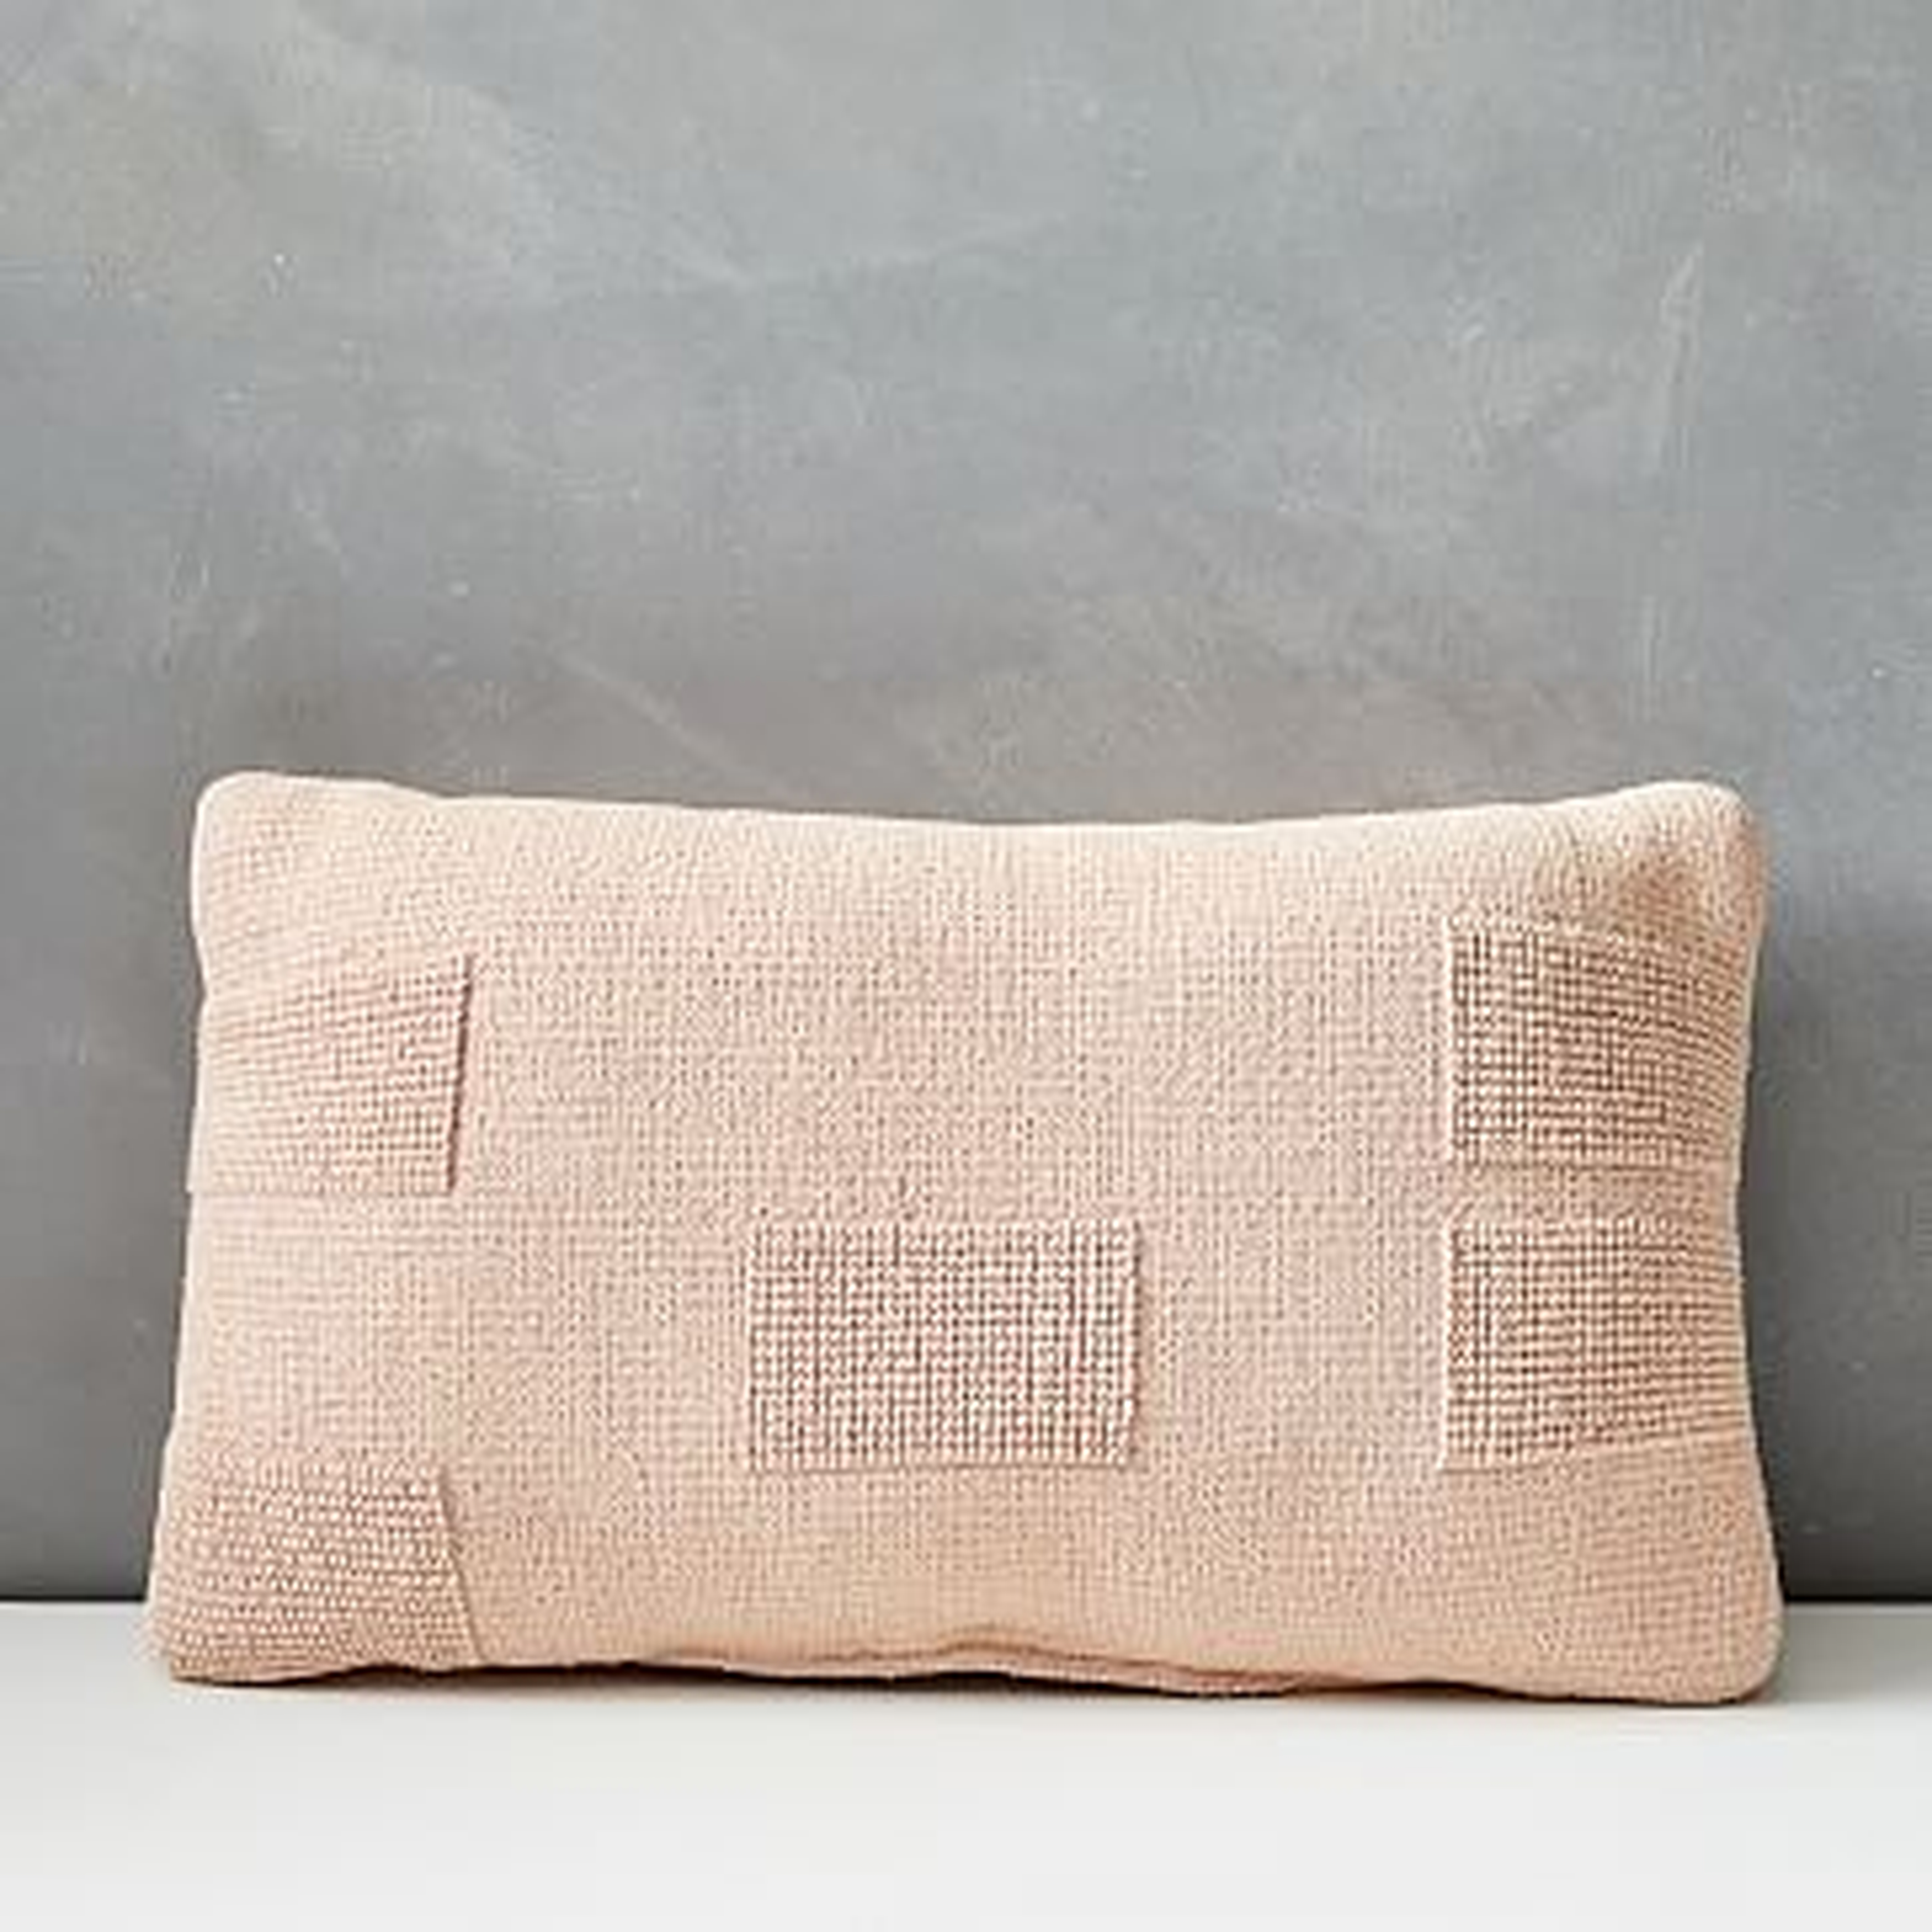 Outdoor Tufted Pillow, 12"x21", Pink Stone - West Elm